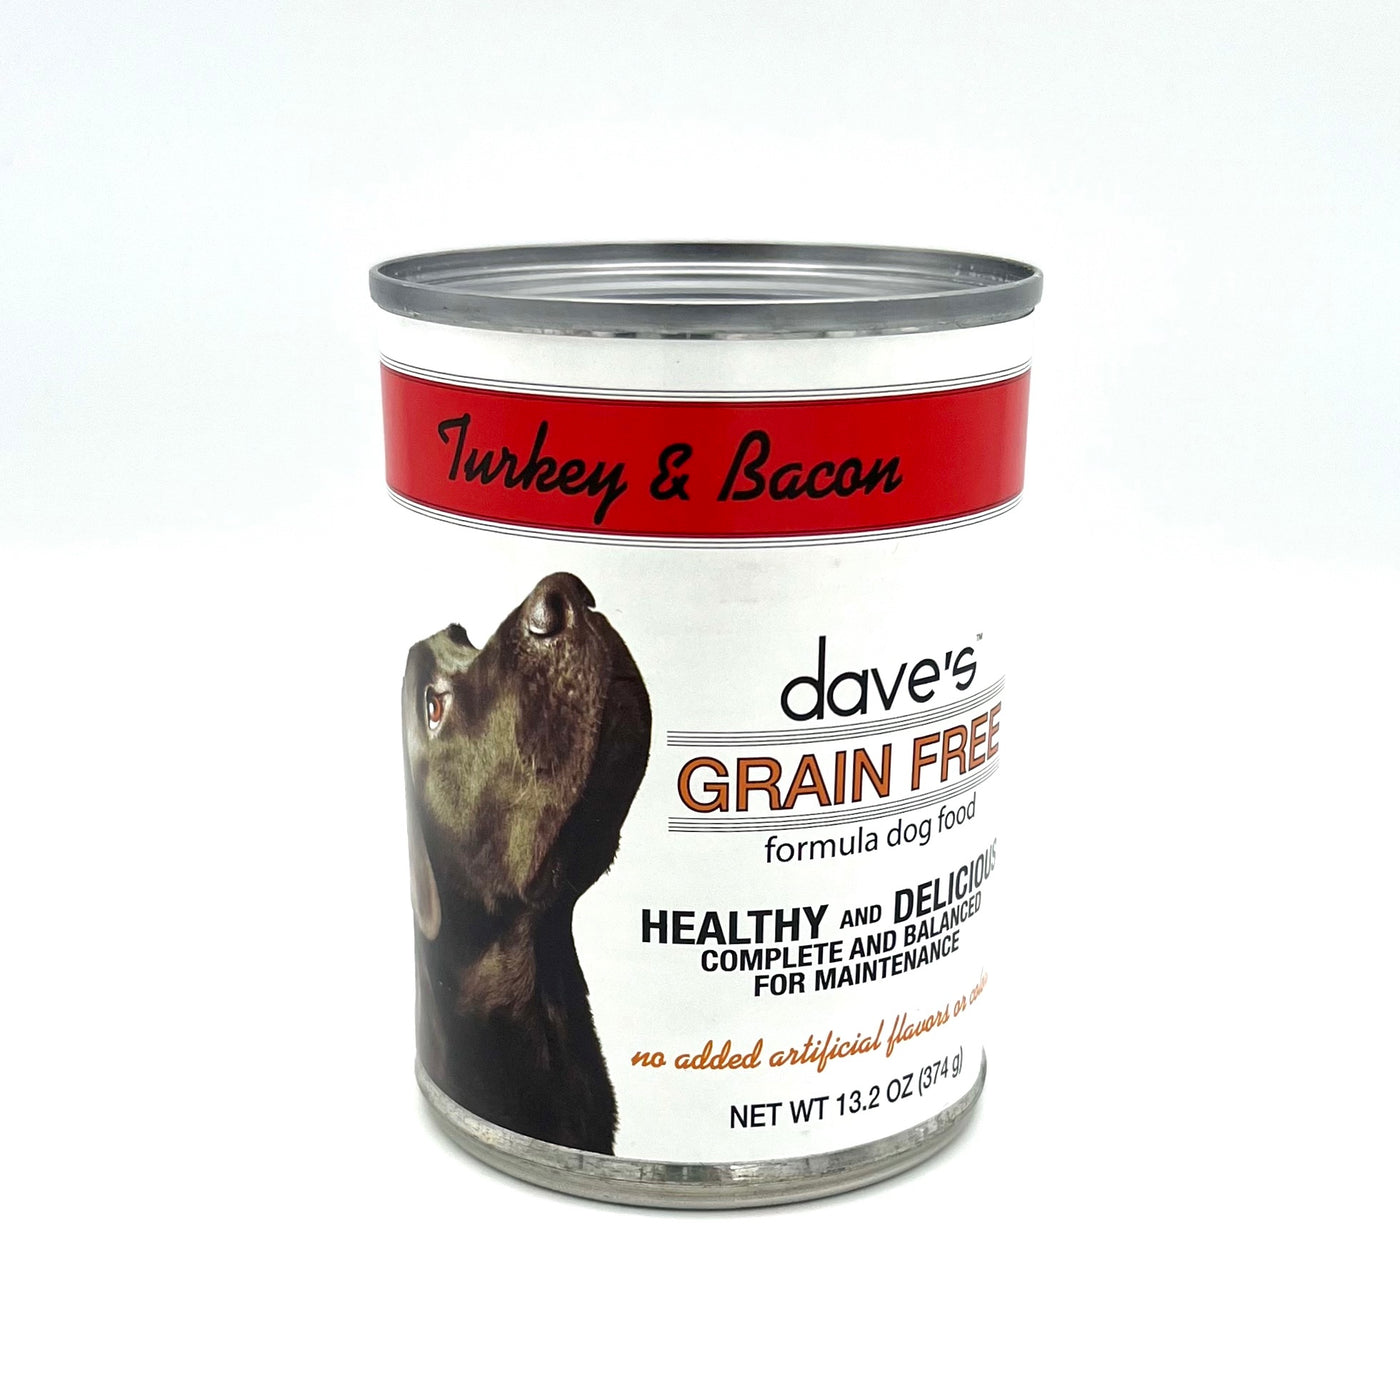 Dave's grain free turkey and bacon canned dog food